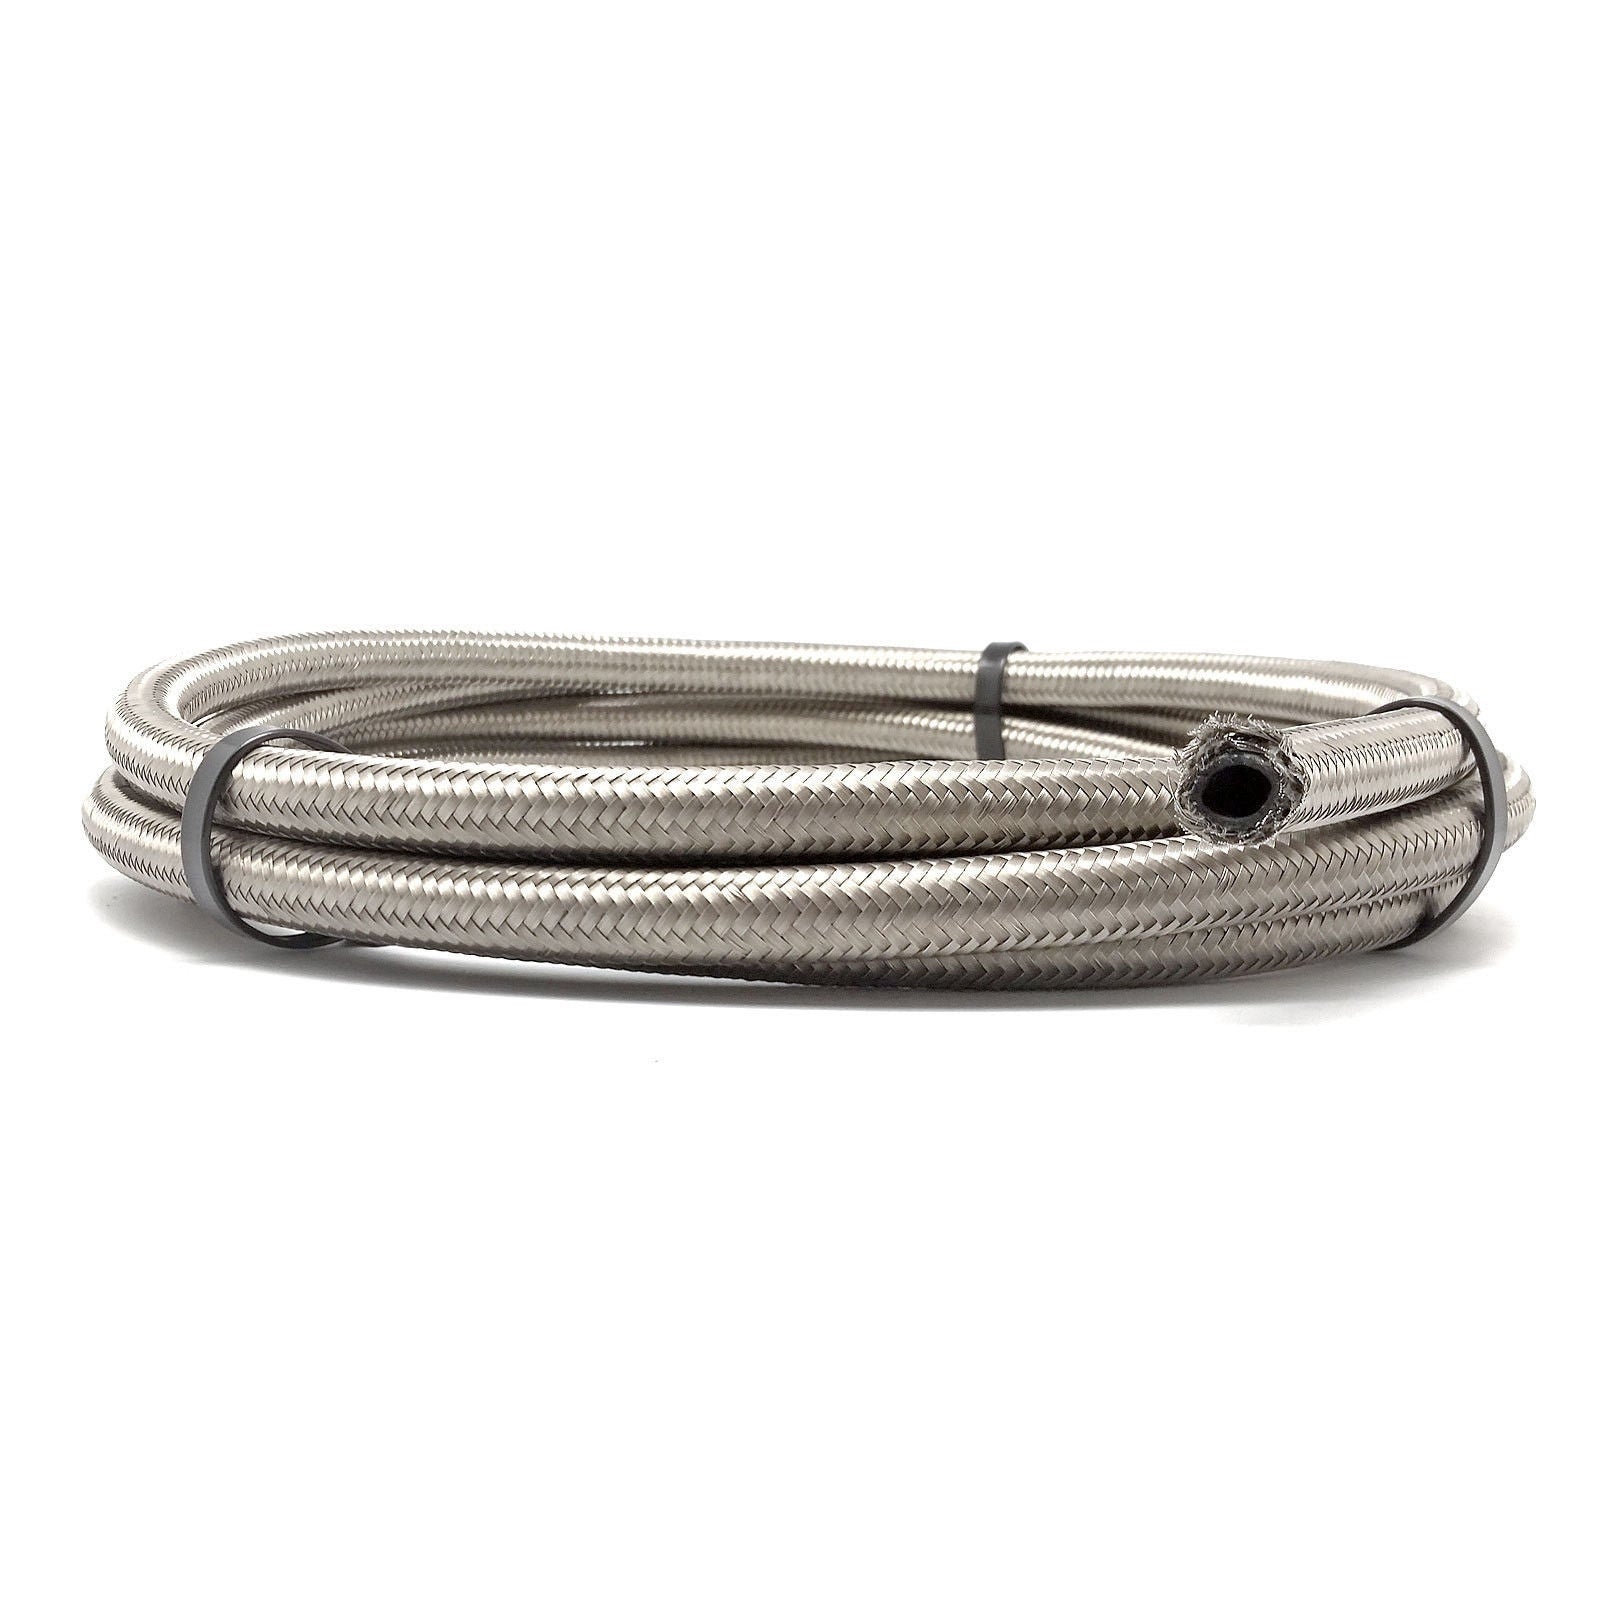 Buy 6 mm 1 Steel Braided Hose 210 bar 14 mm online at best rates